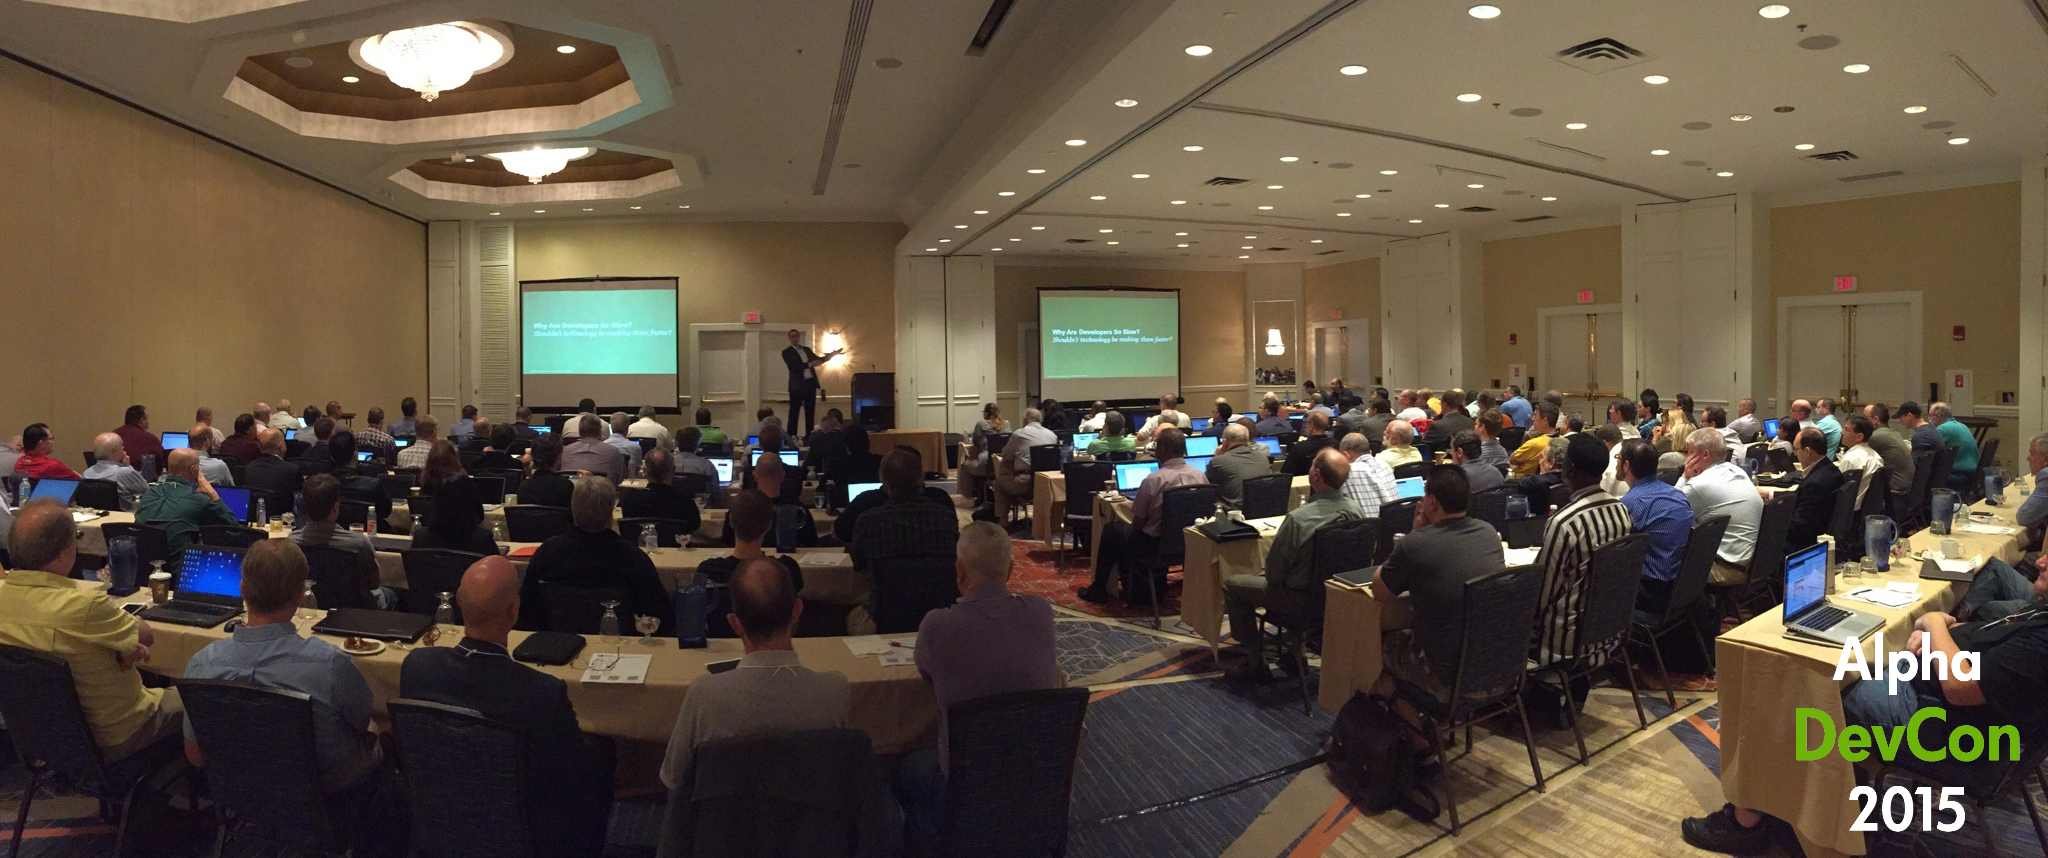 Michael Facemire of Forrester Research addresses attendees at Alpha DevCon 2015